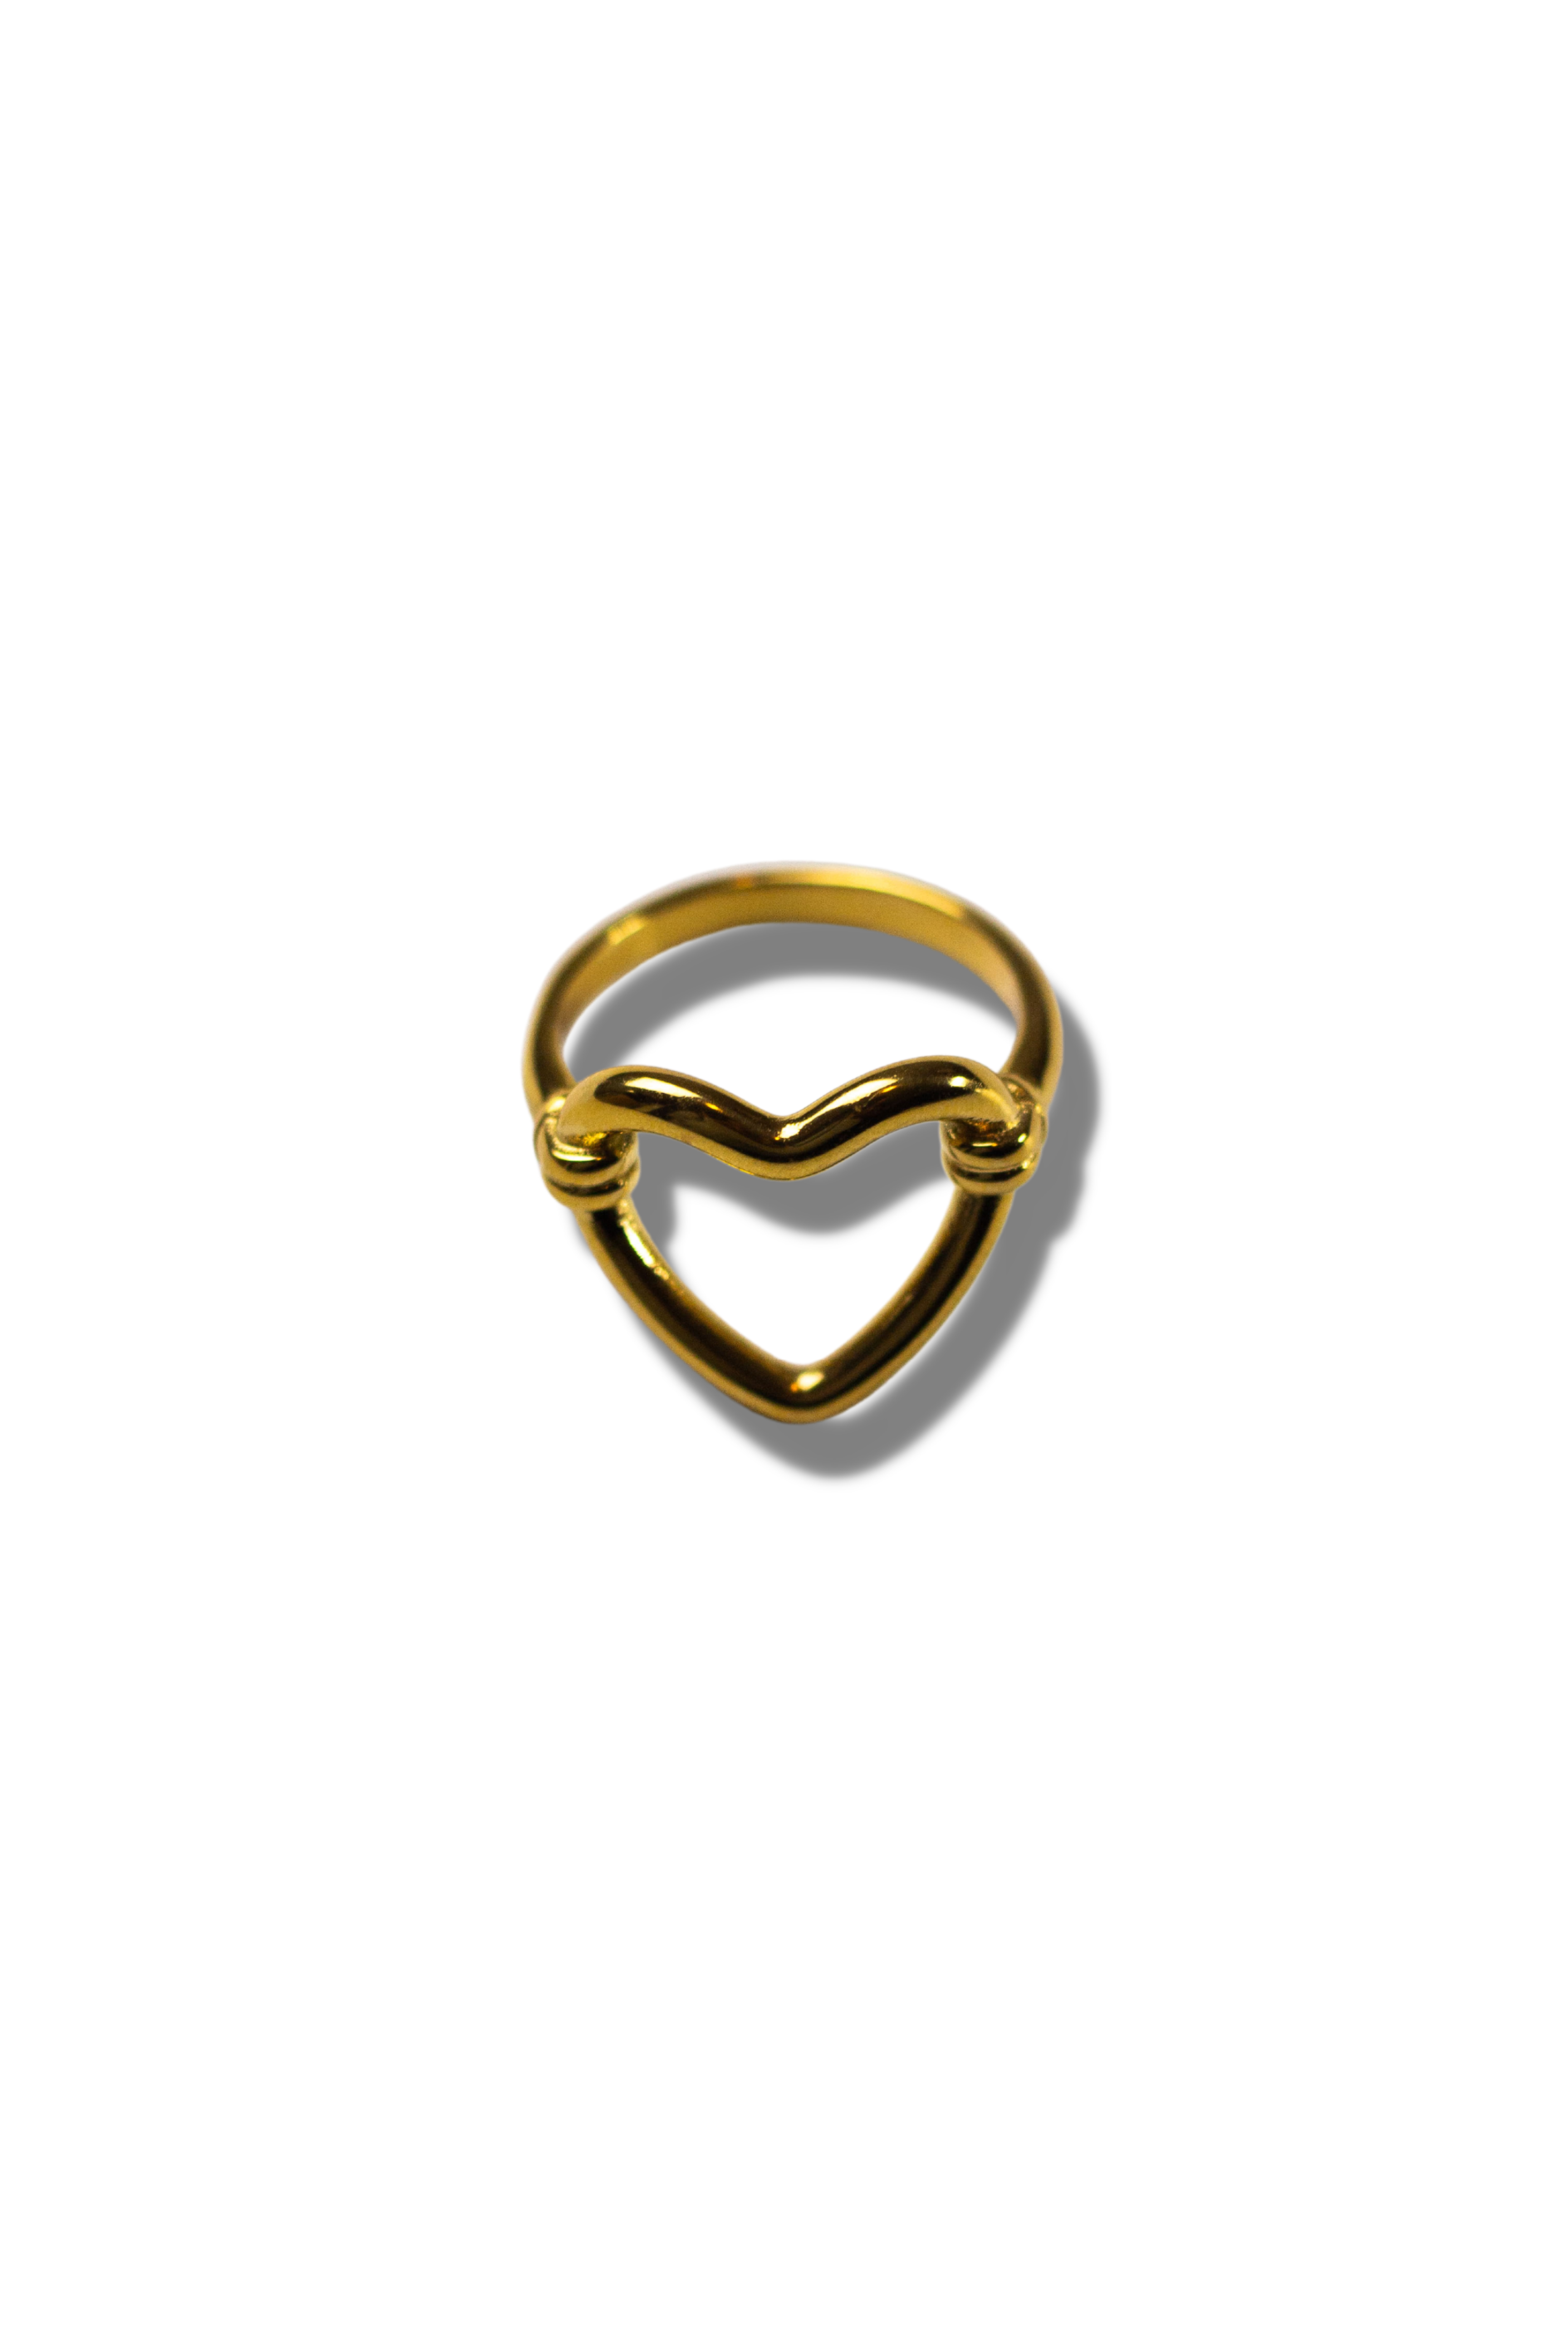 18k gold ring with a heart shape. Ella's Element Hollow Heart Out Ring by E's Element.